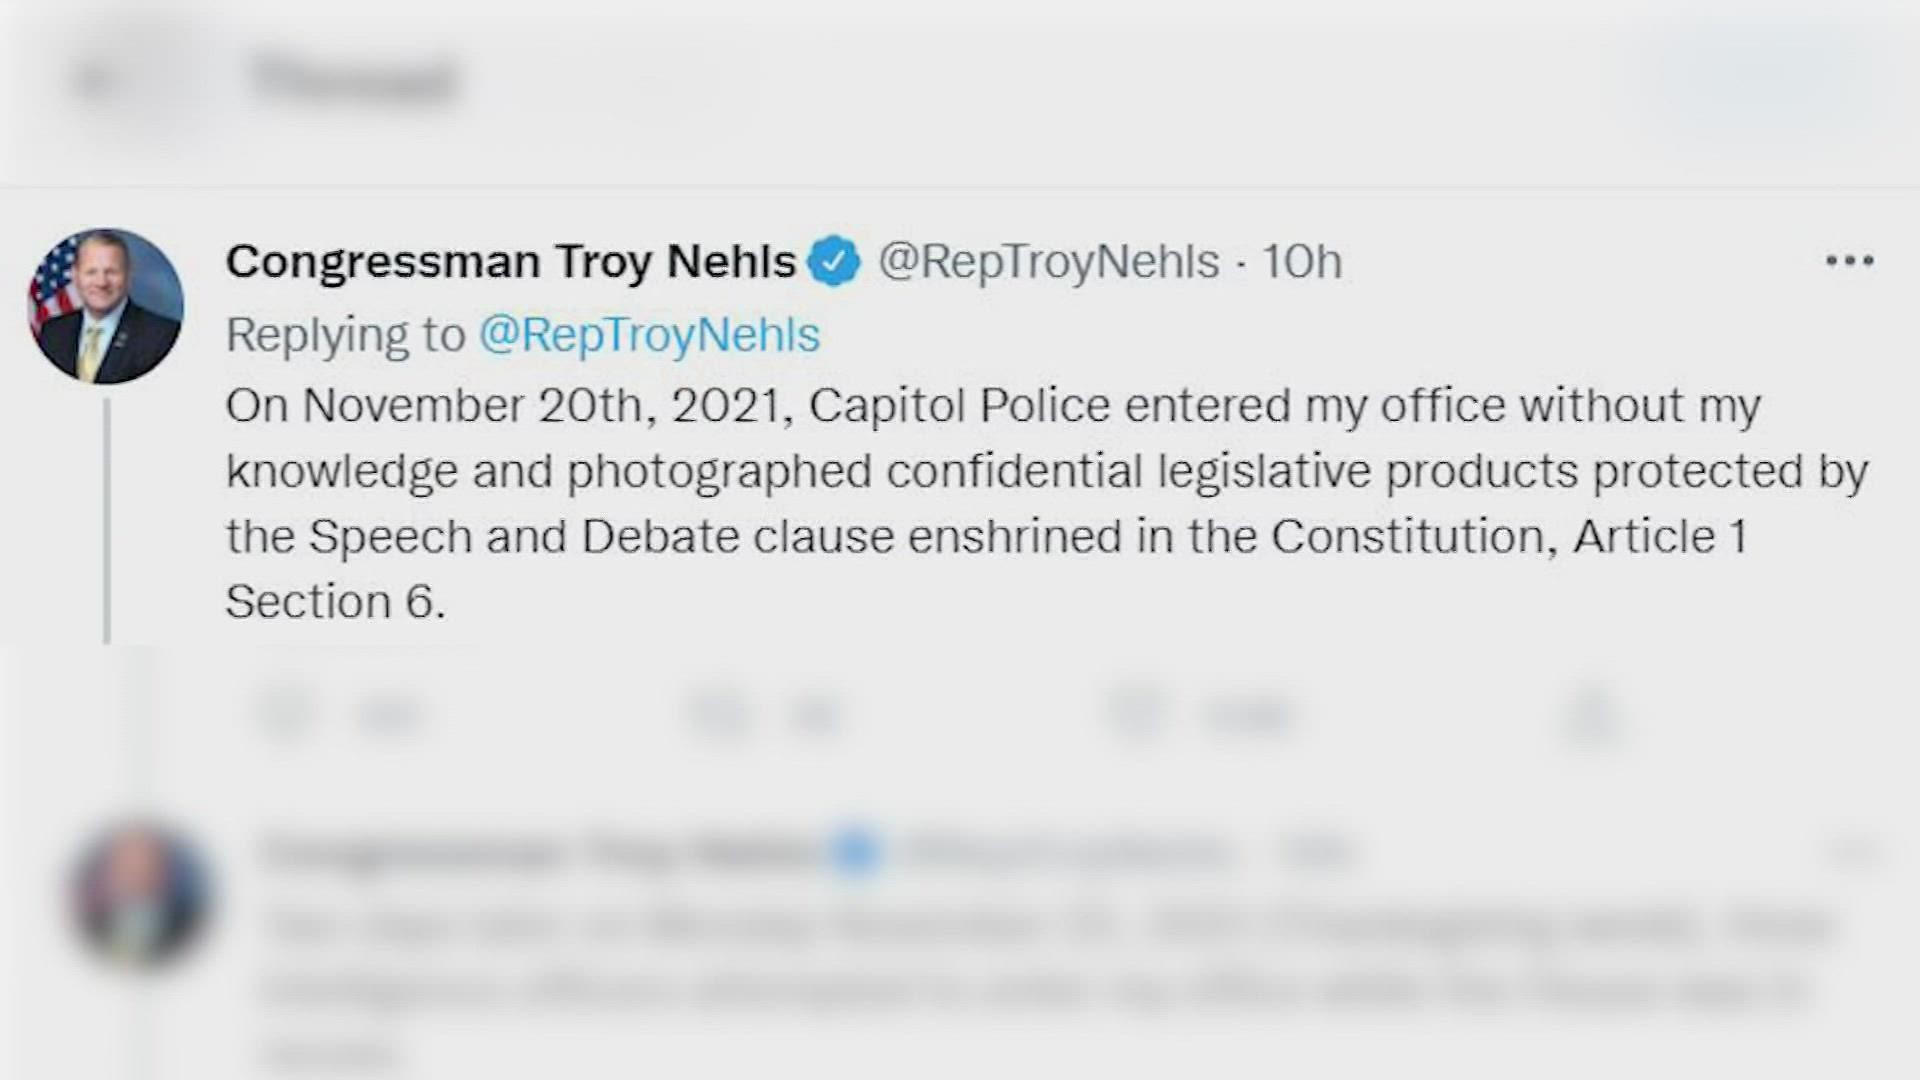 The Texas Republican said a Capitol police officer entered his empty office without permission and "took photos of confidential materials."